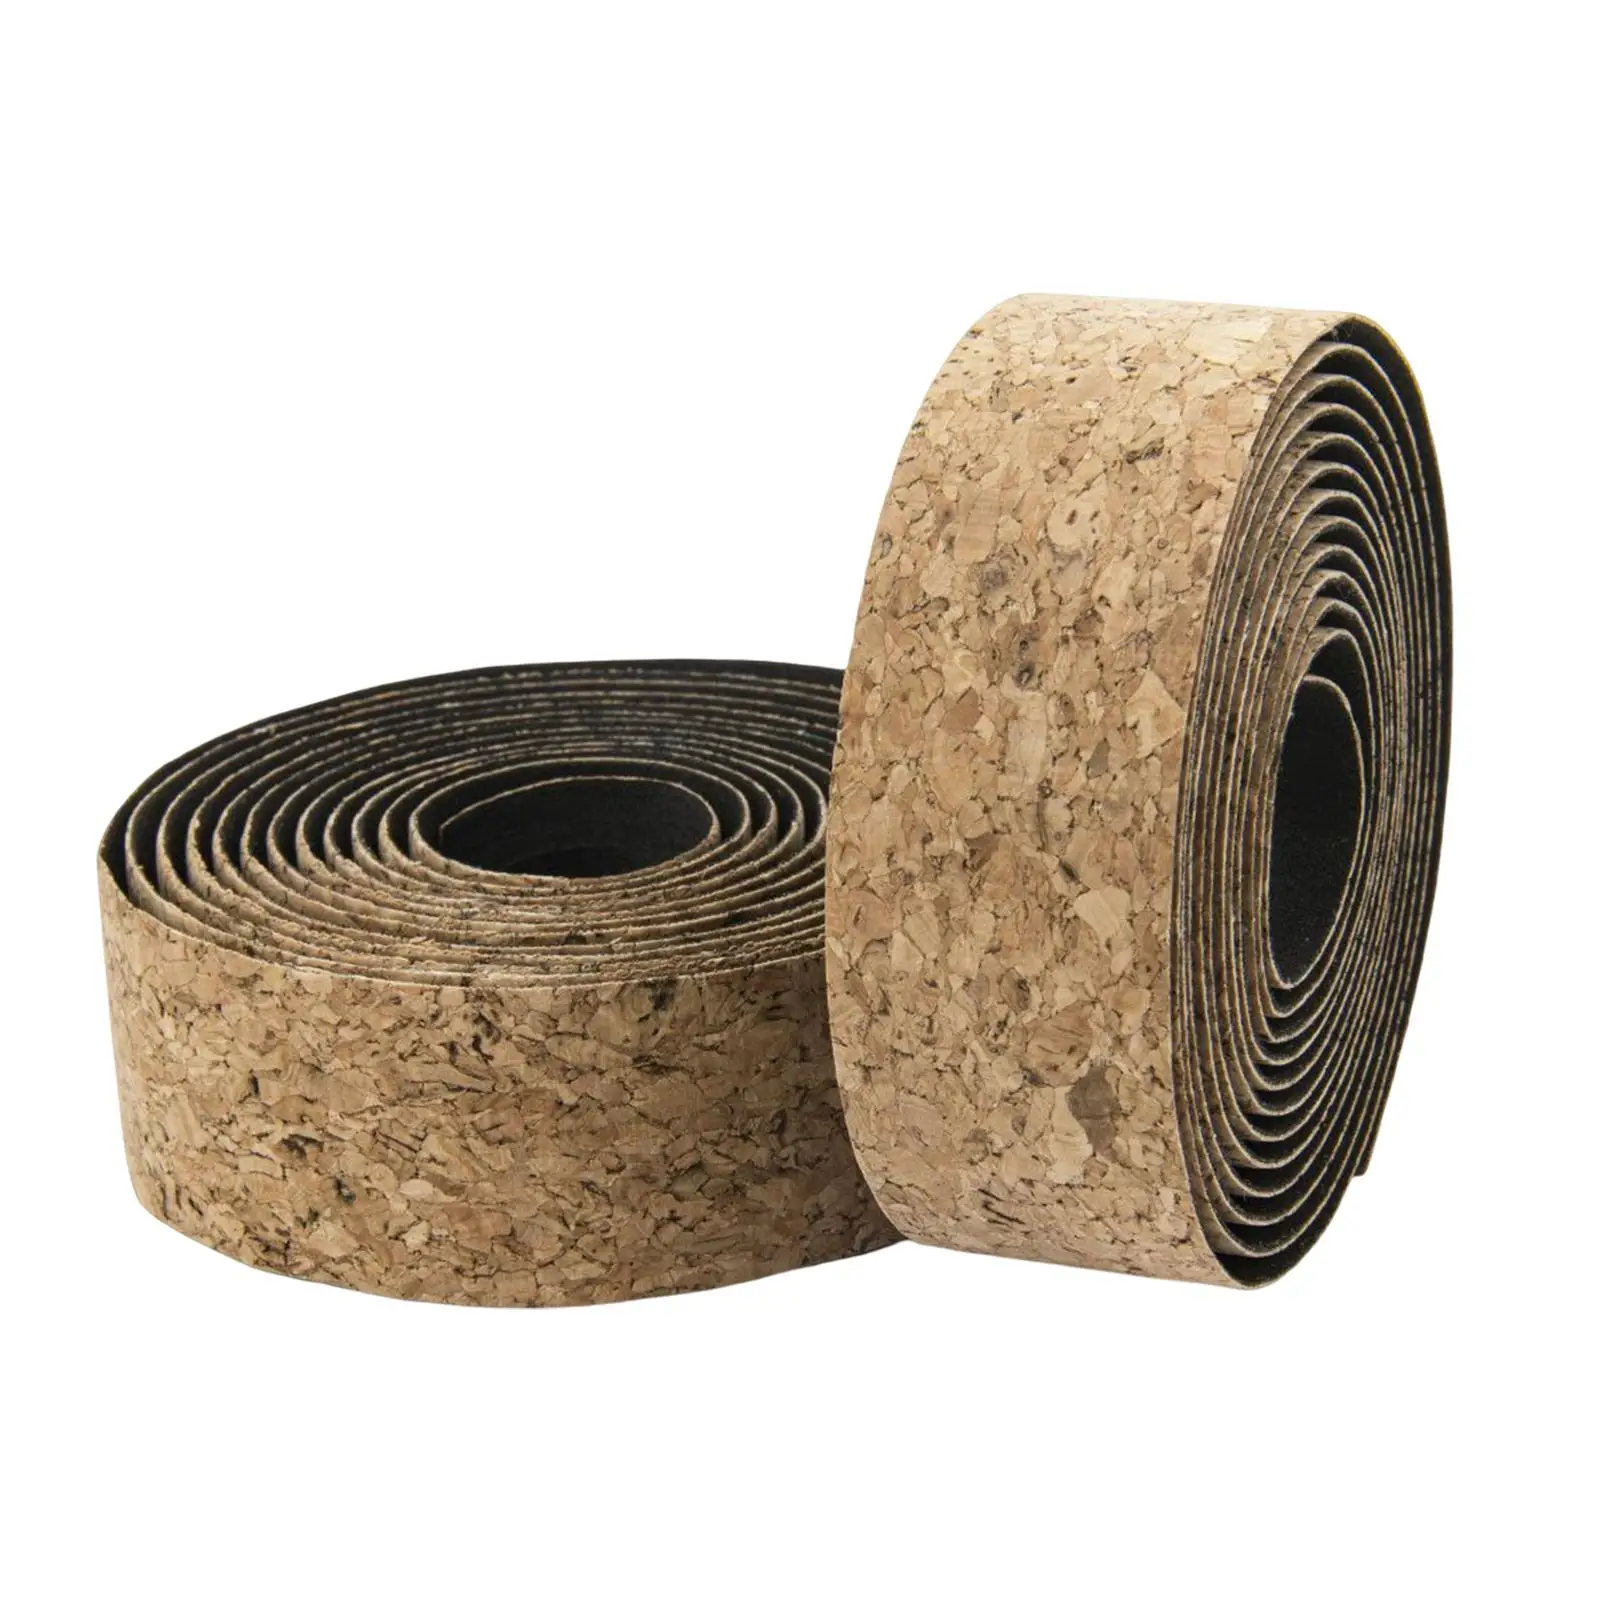 Bicycle Bar Tape Adhesive Back with Bar Plugs Cork Tape Wood Chips Texture Non